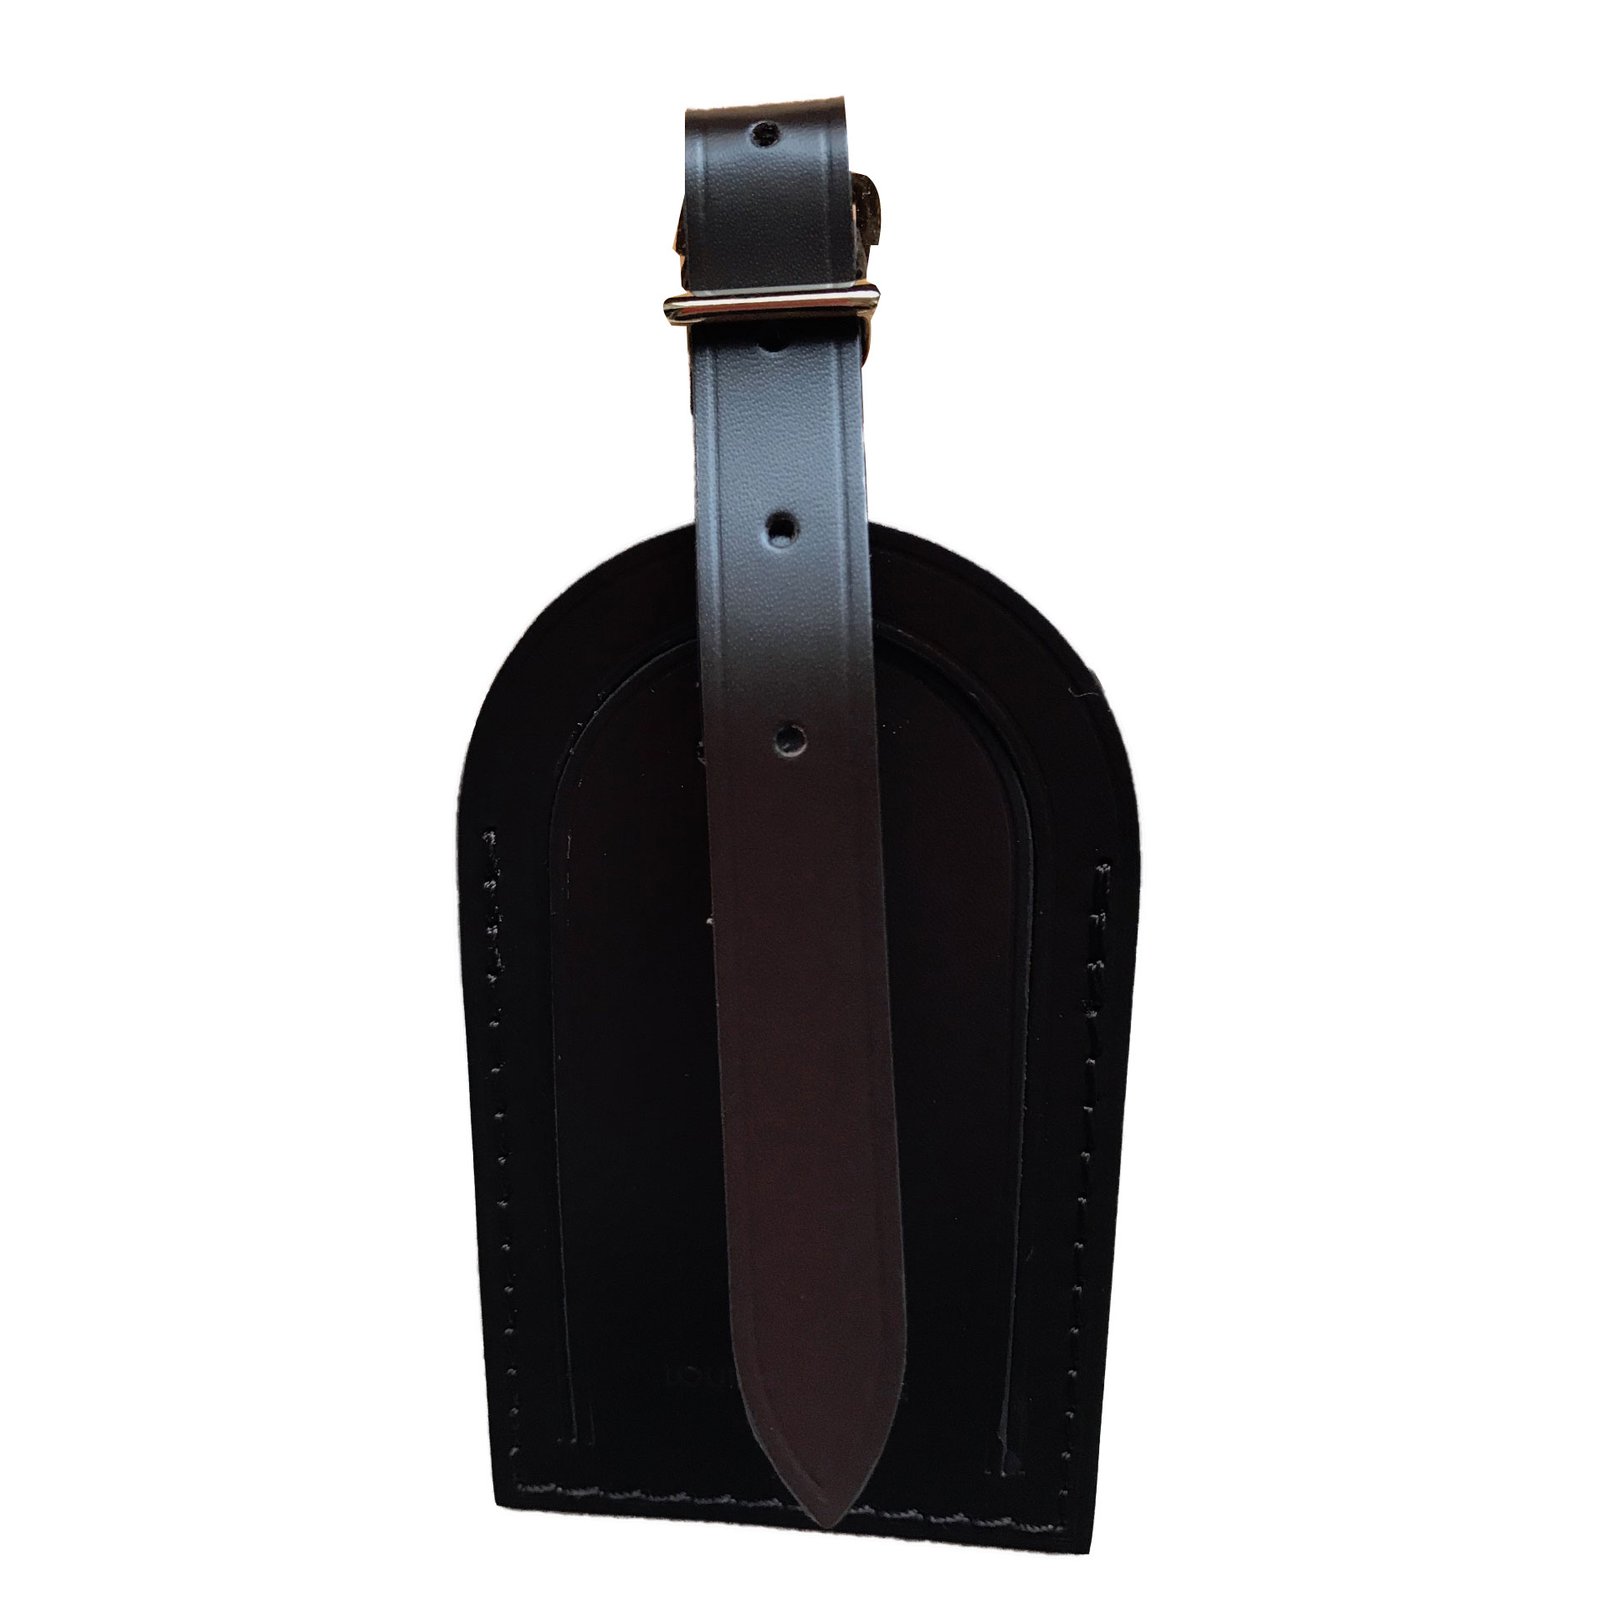 Louis Vuitton Canada hot stamp on Ebene luggage tag  Louis vuitton luggage  tag, Louis vuitton canada, Luggage tags